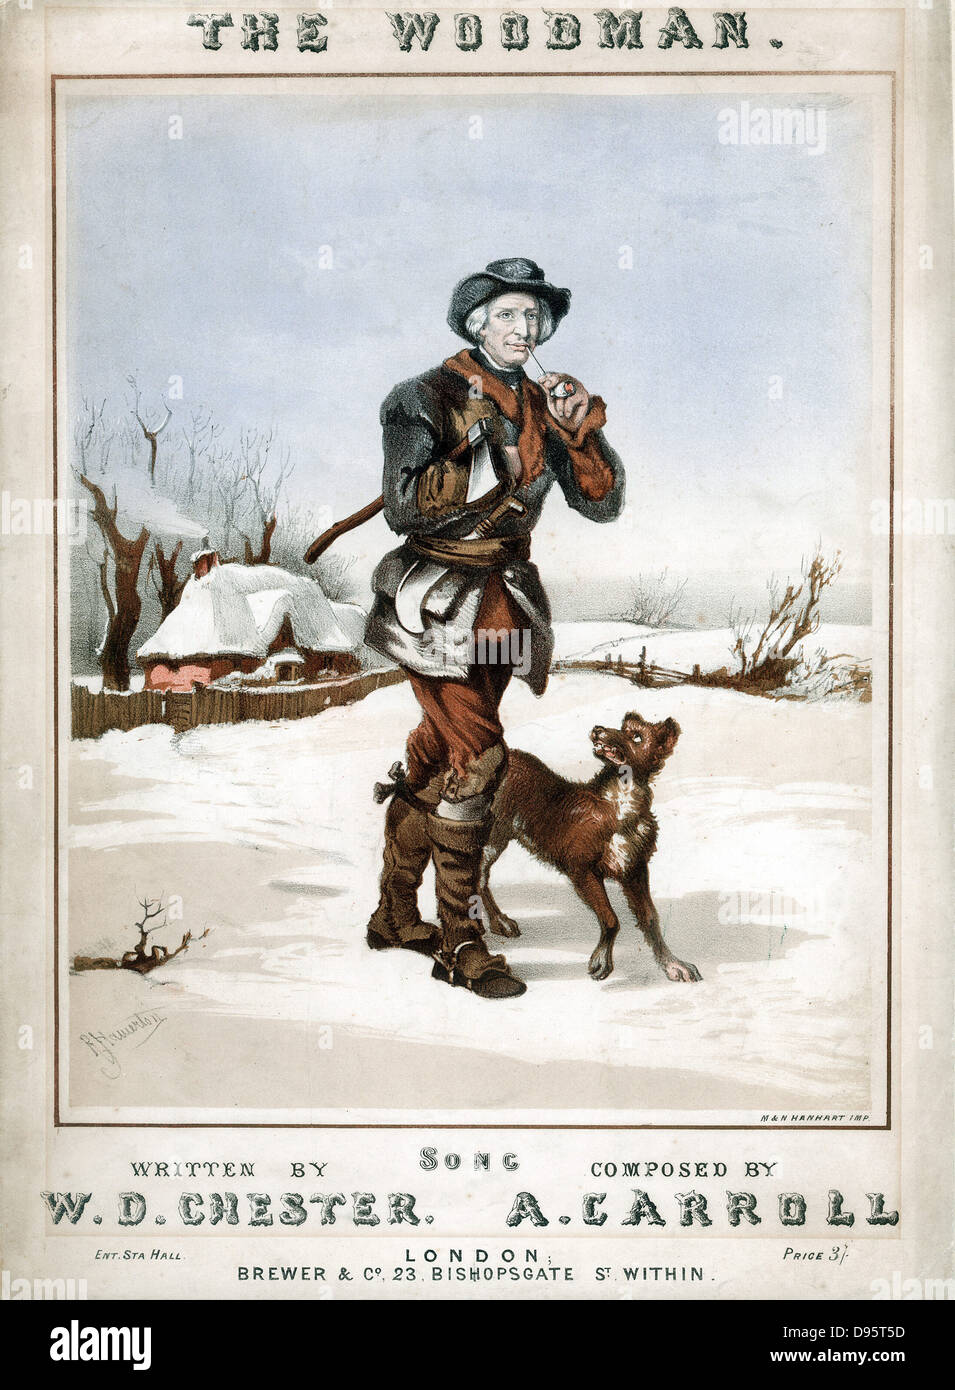 The Woodman' setting off to work in snowy landscape, axe under arm and billhook tucked in belt, with pipe for comfort and dog for company. Coloured lithograph from cover of song with lyrics by WD Chester, composer A Carroll Stock Photo